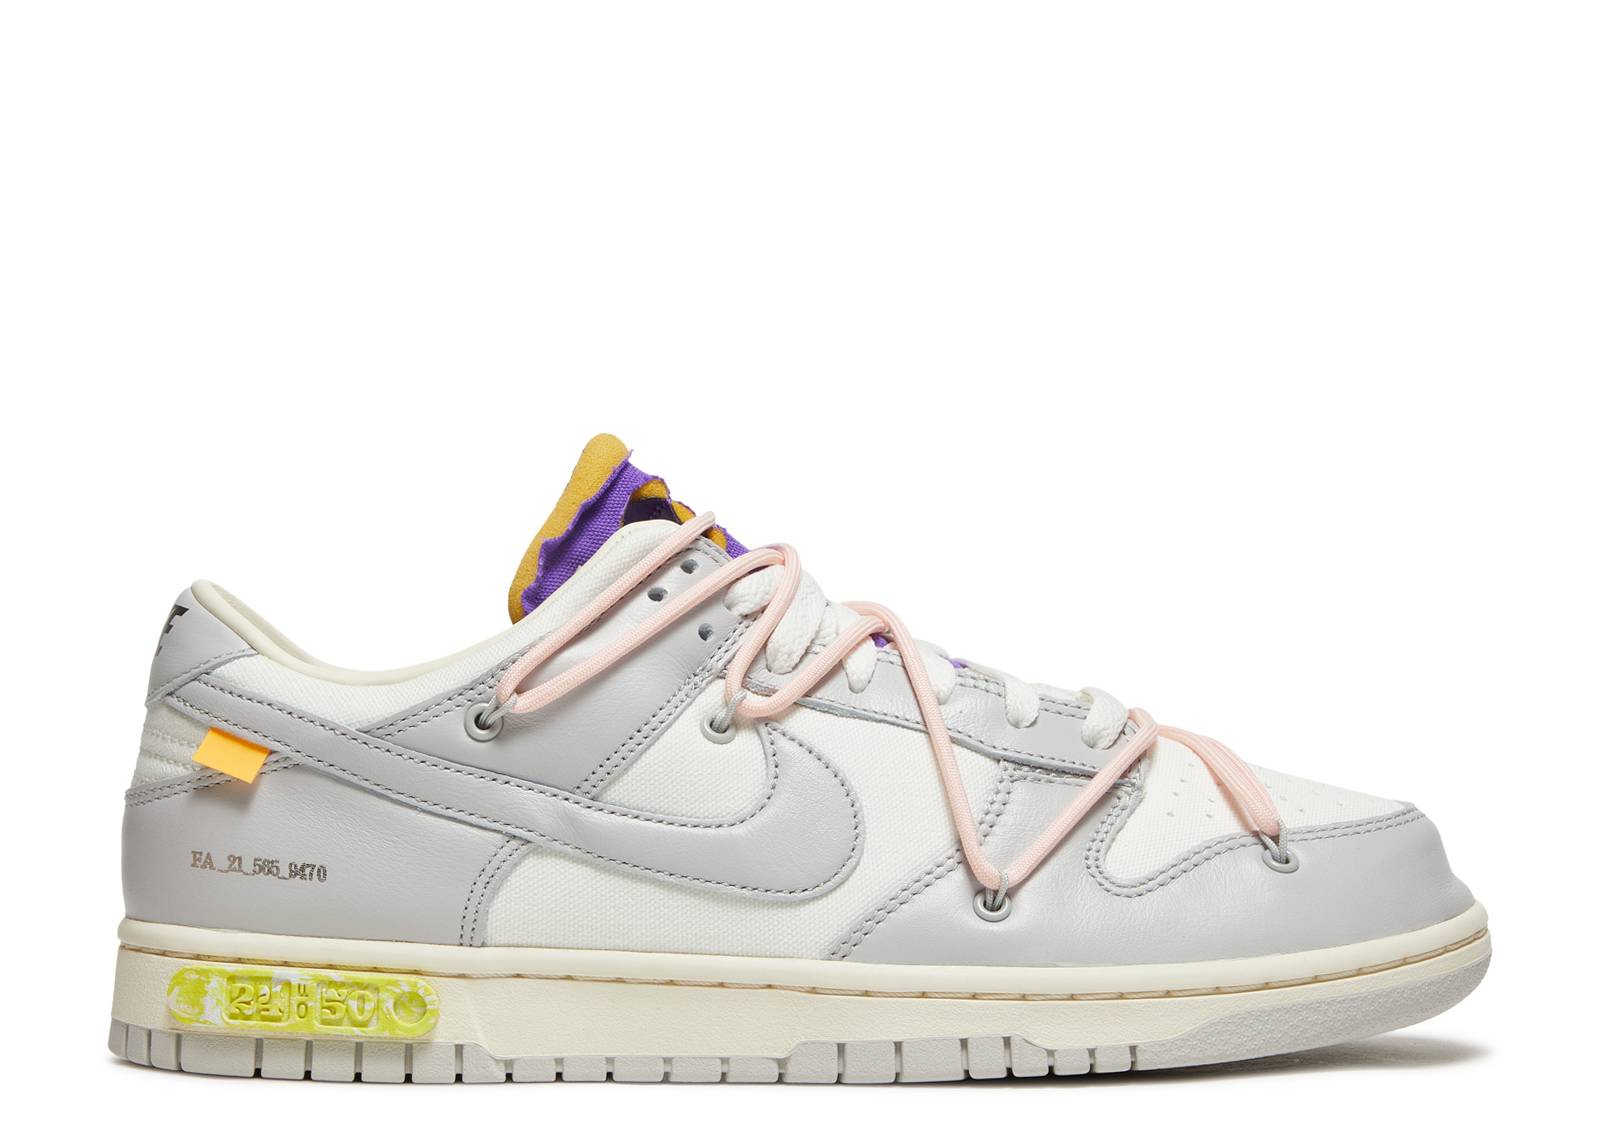 Off-White x Dunk Low Lot 24 of 50